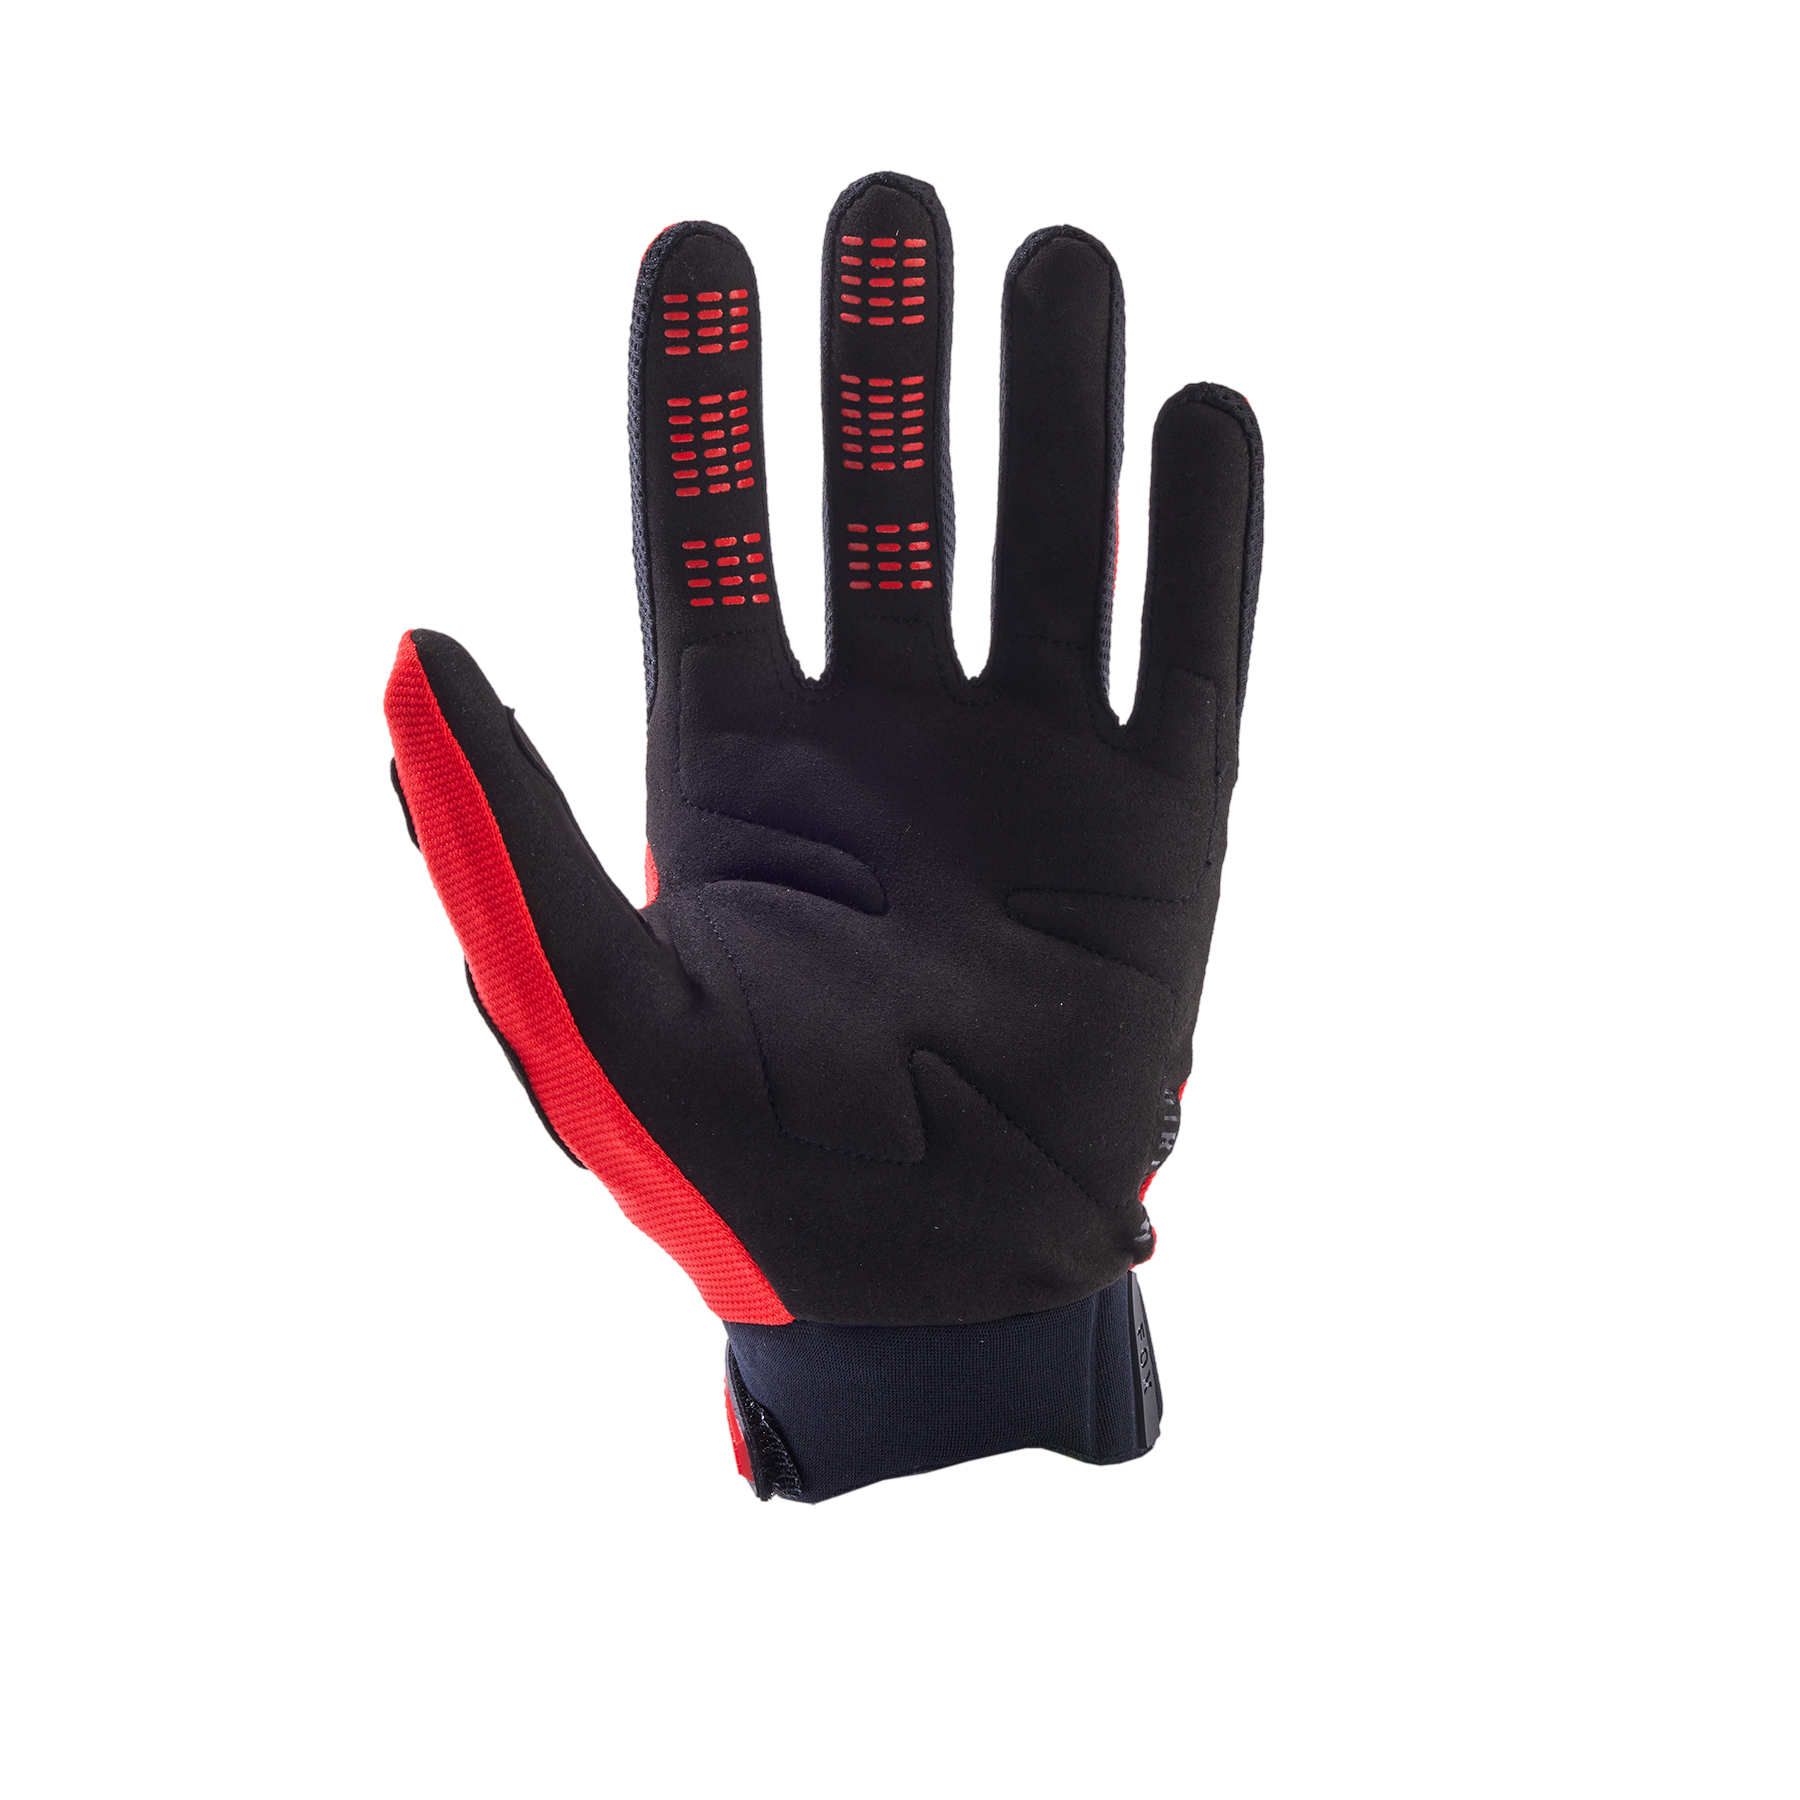 Fox Dirtpaw Gloves - L - Flo Red - Image 2